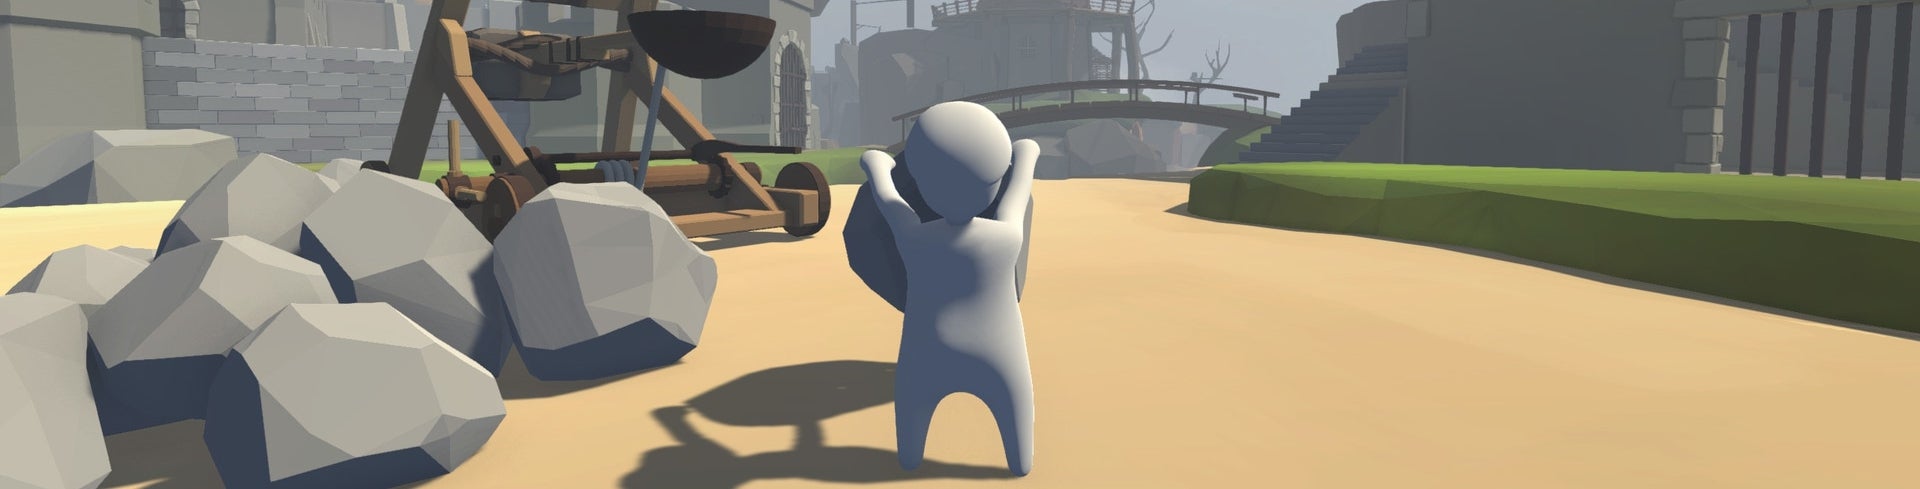 Image for How Human: Fall Flat rose up to become a smash hit